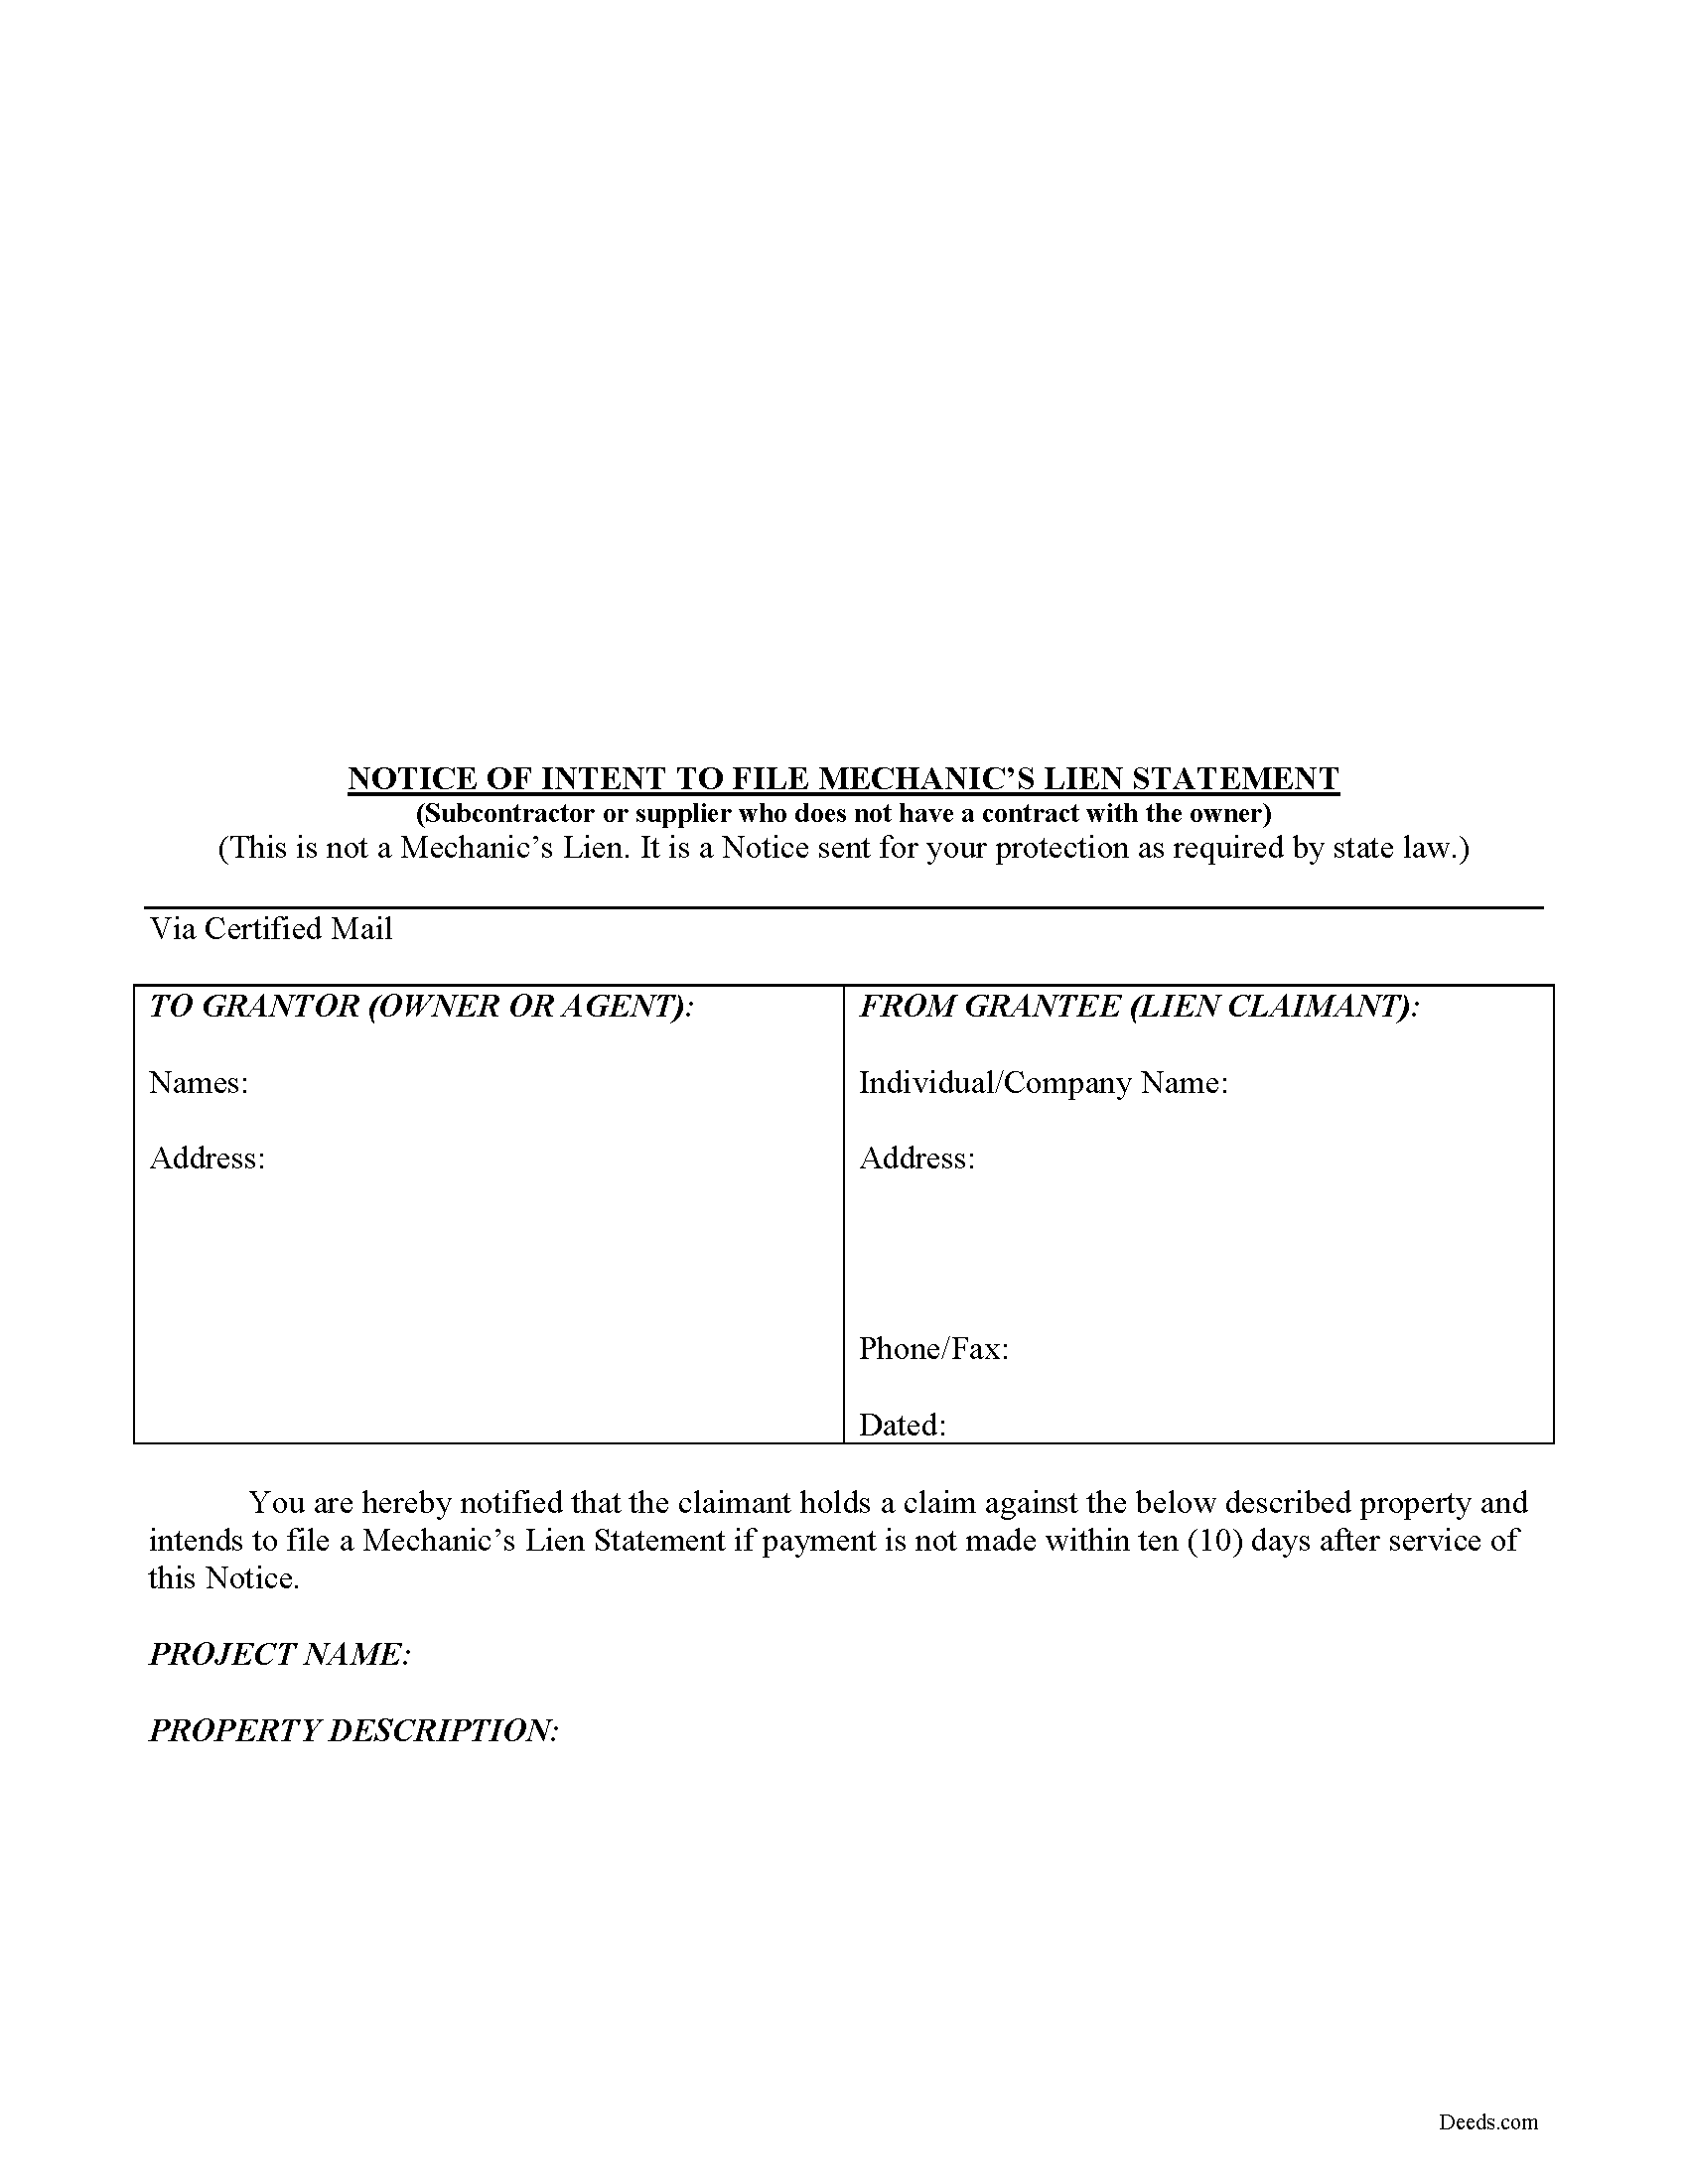 Notice of Intent Form